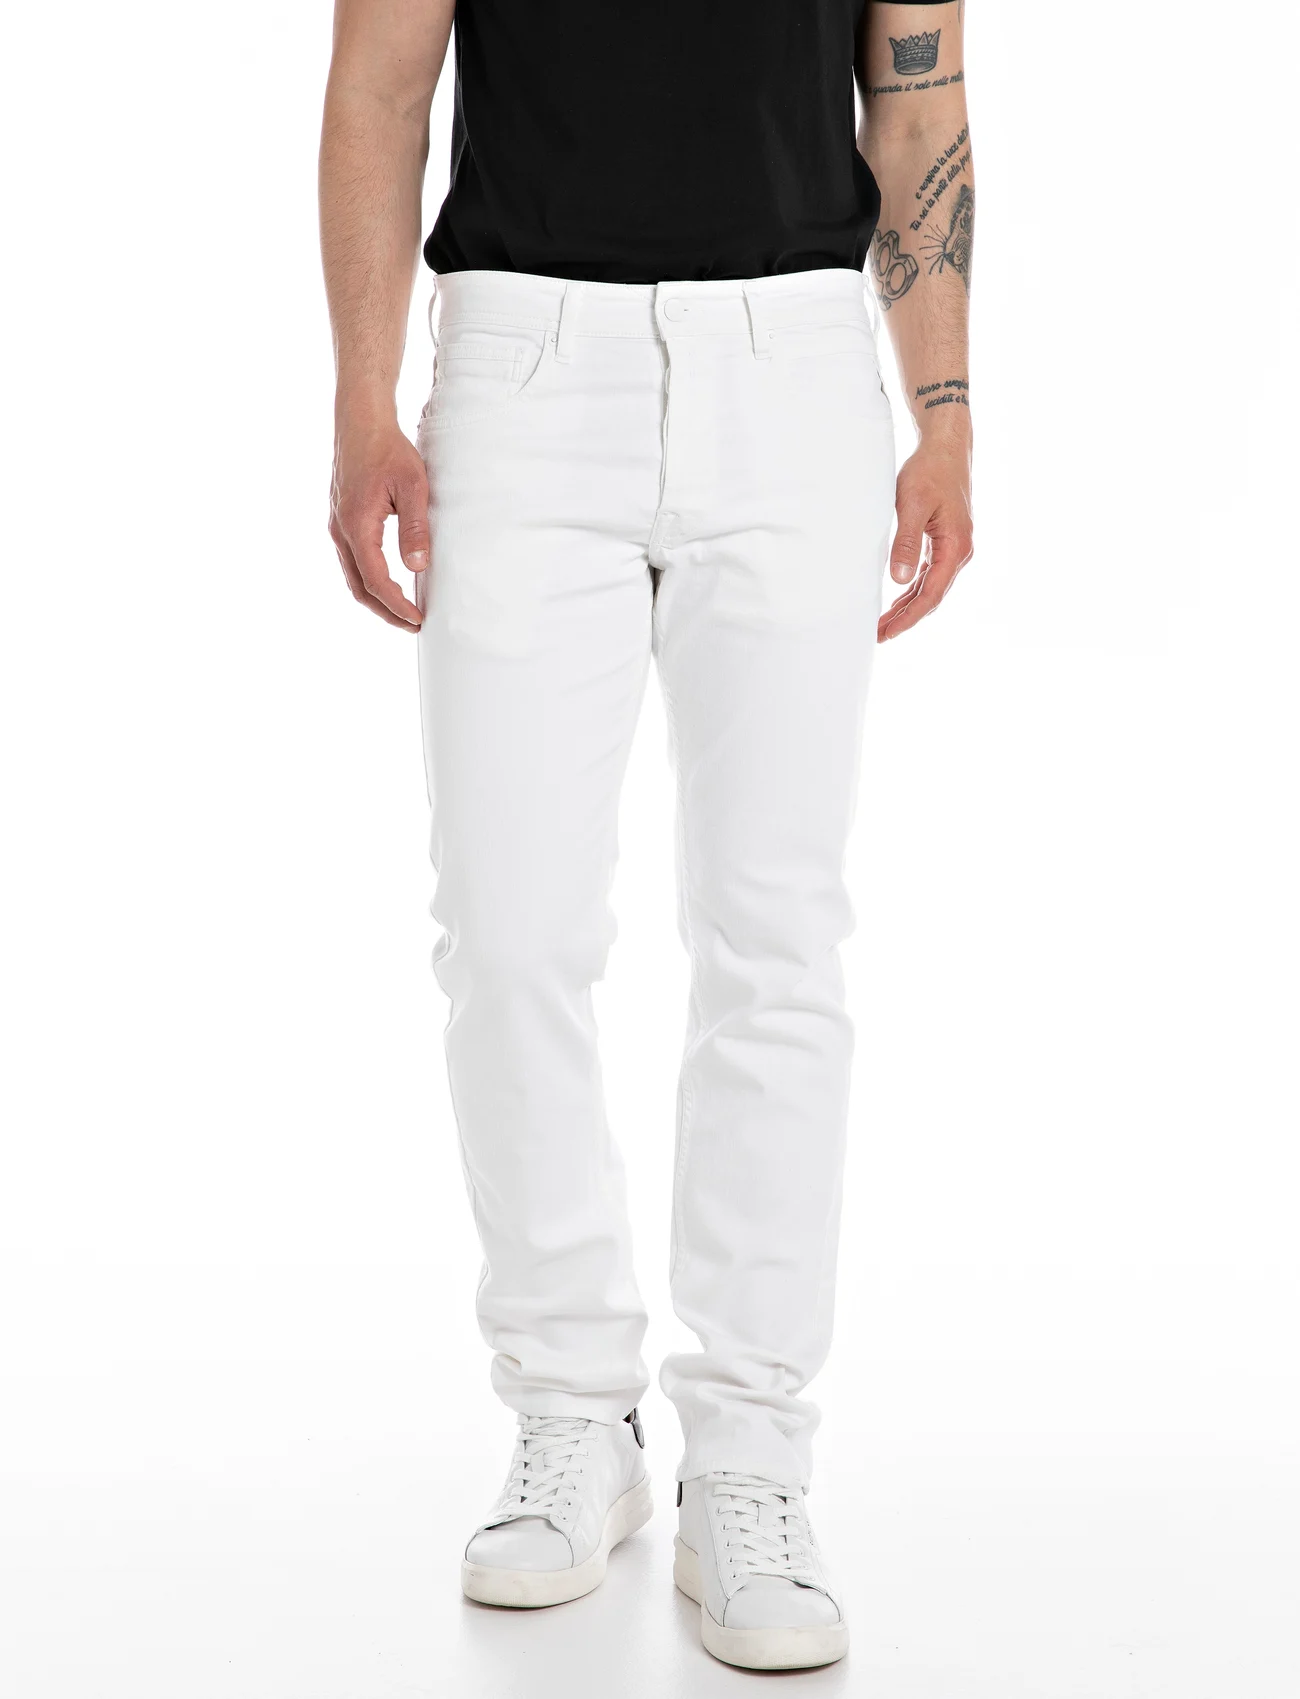 Replay - GROVER Trousers STRAIGHT - skinny jeans - white - 0